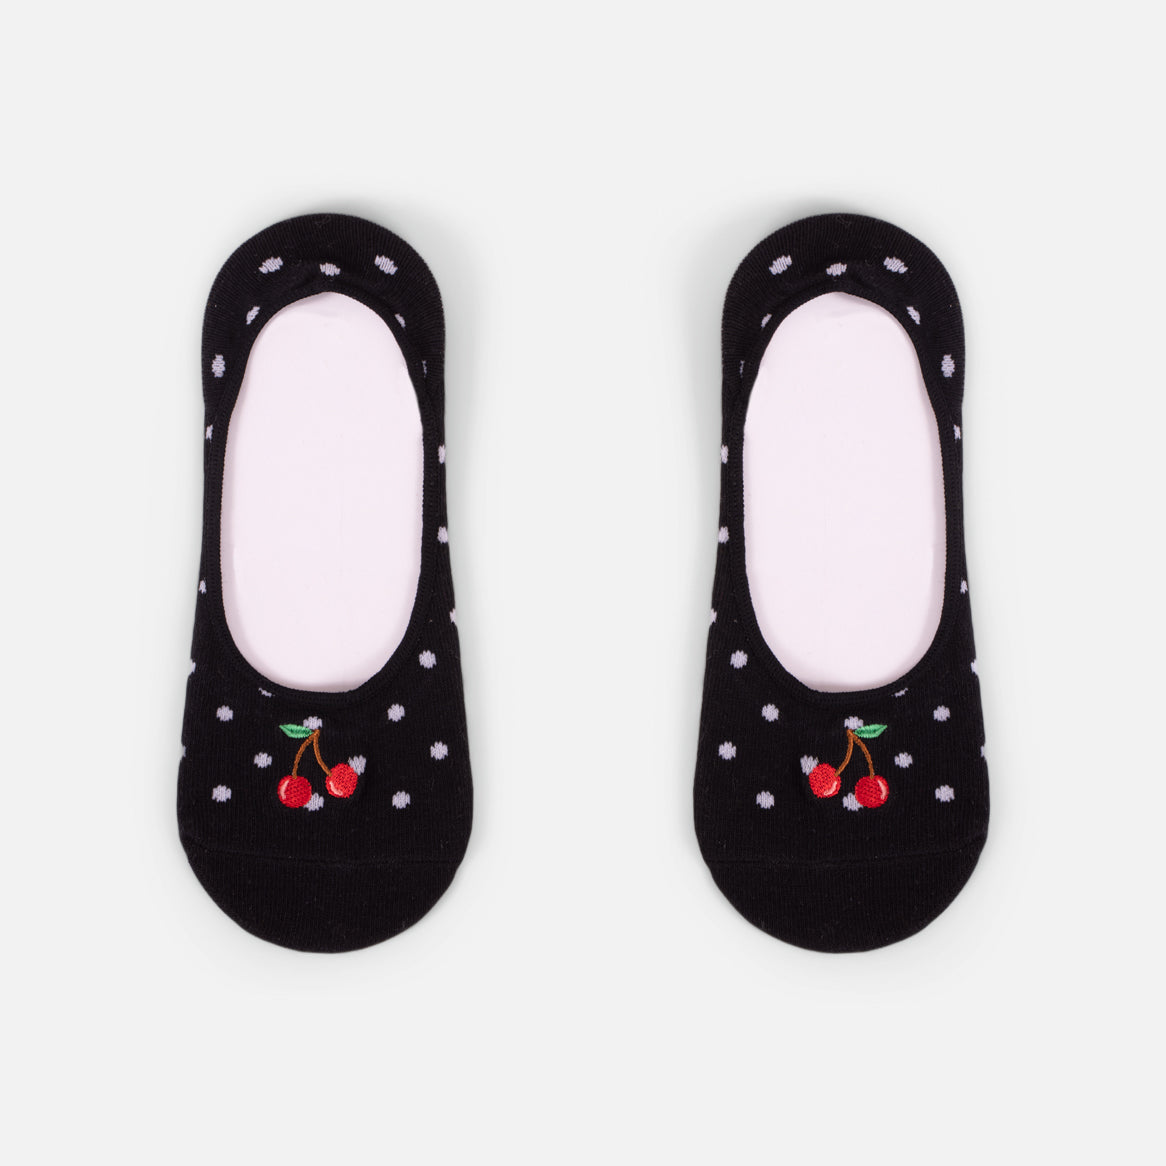 Black footlet with dots and cherries